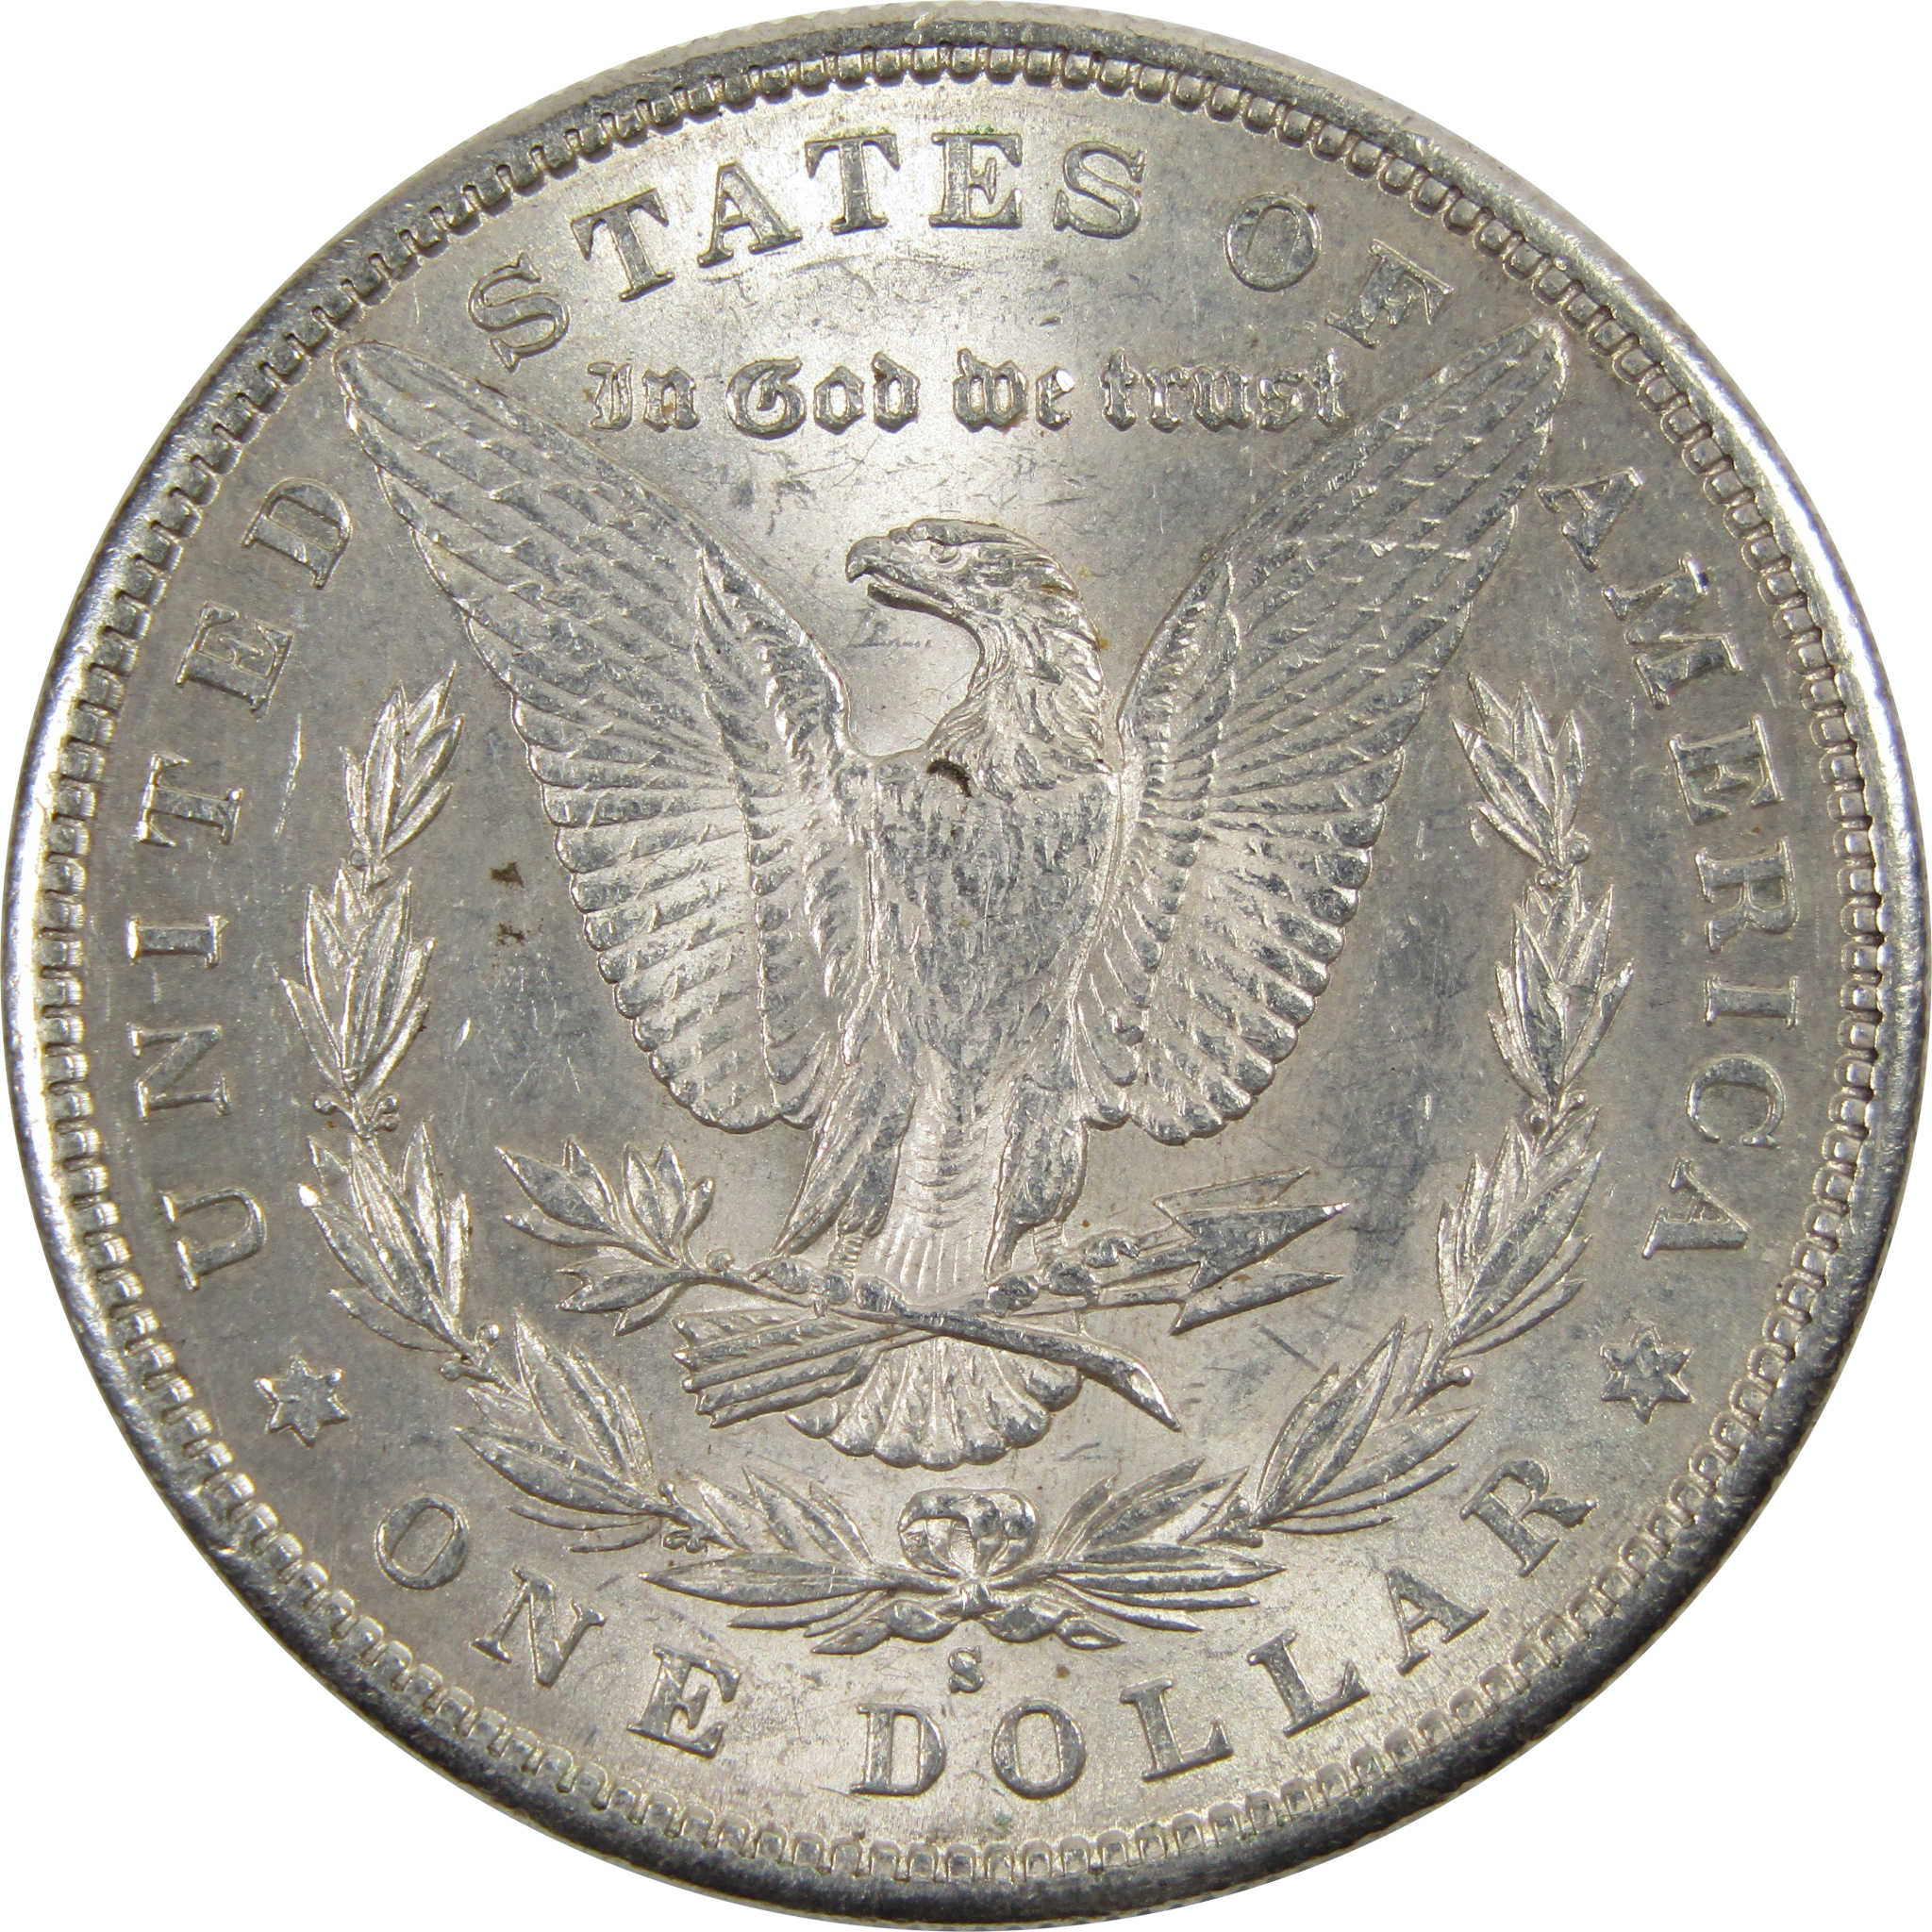 1890 S Morgan Dollar AU About Uncirculated 90% Silver SKU:I8192 - Morgan coin - Morgan silver dollar - Morgan silver dollar for sale - Profile Coins &amp; Collectibles